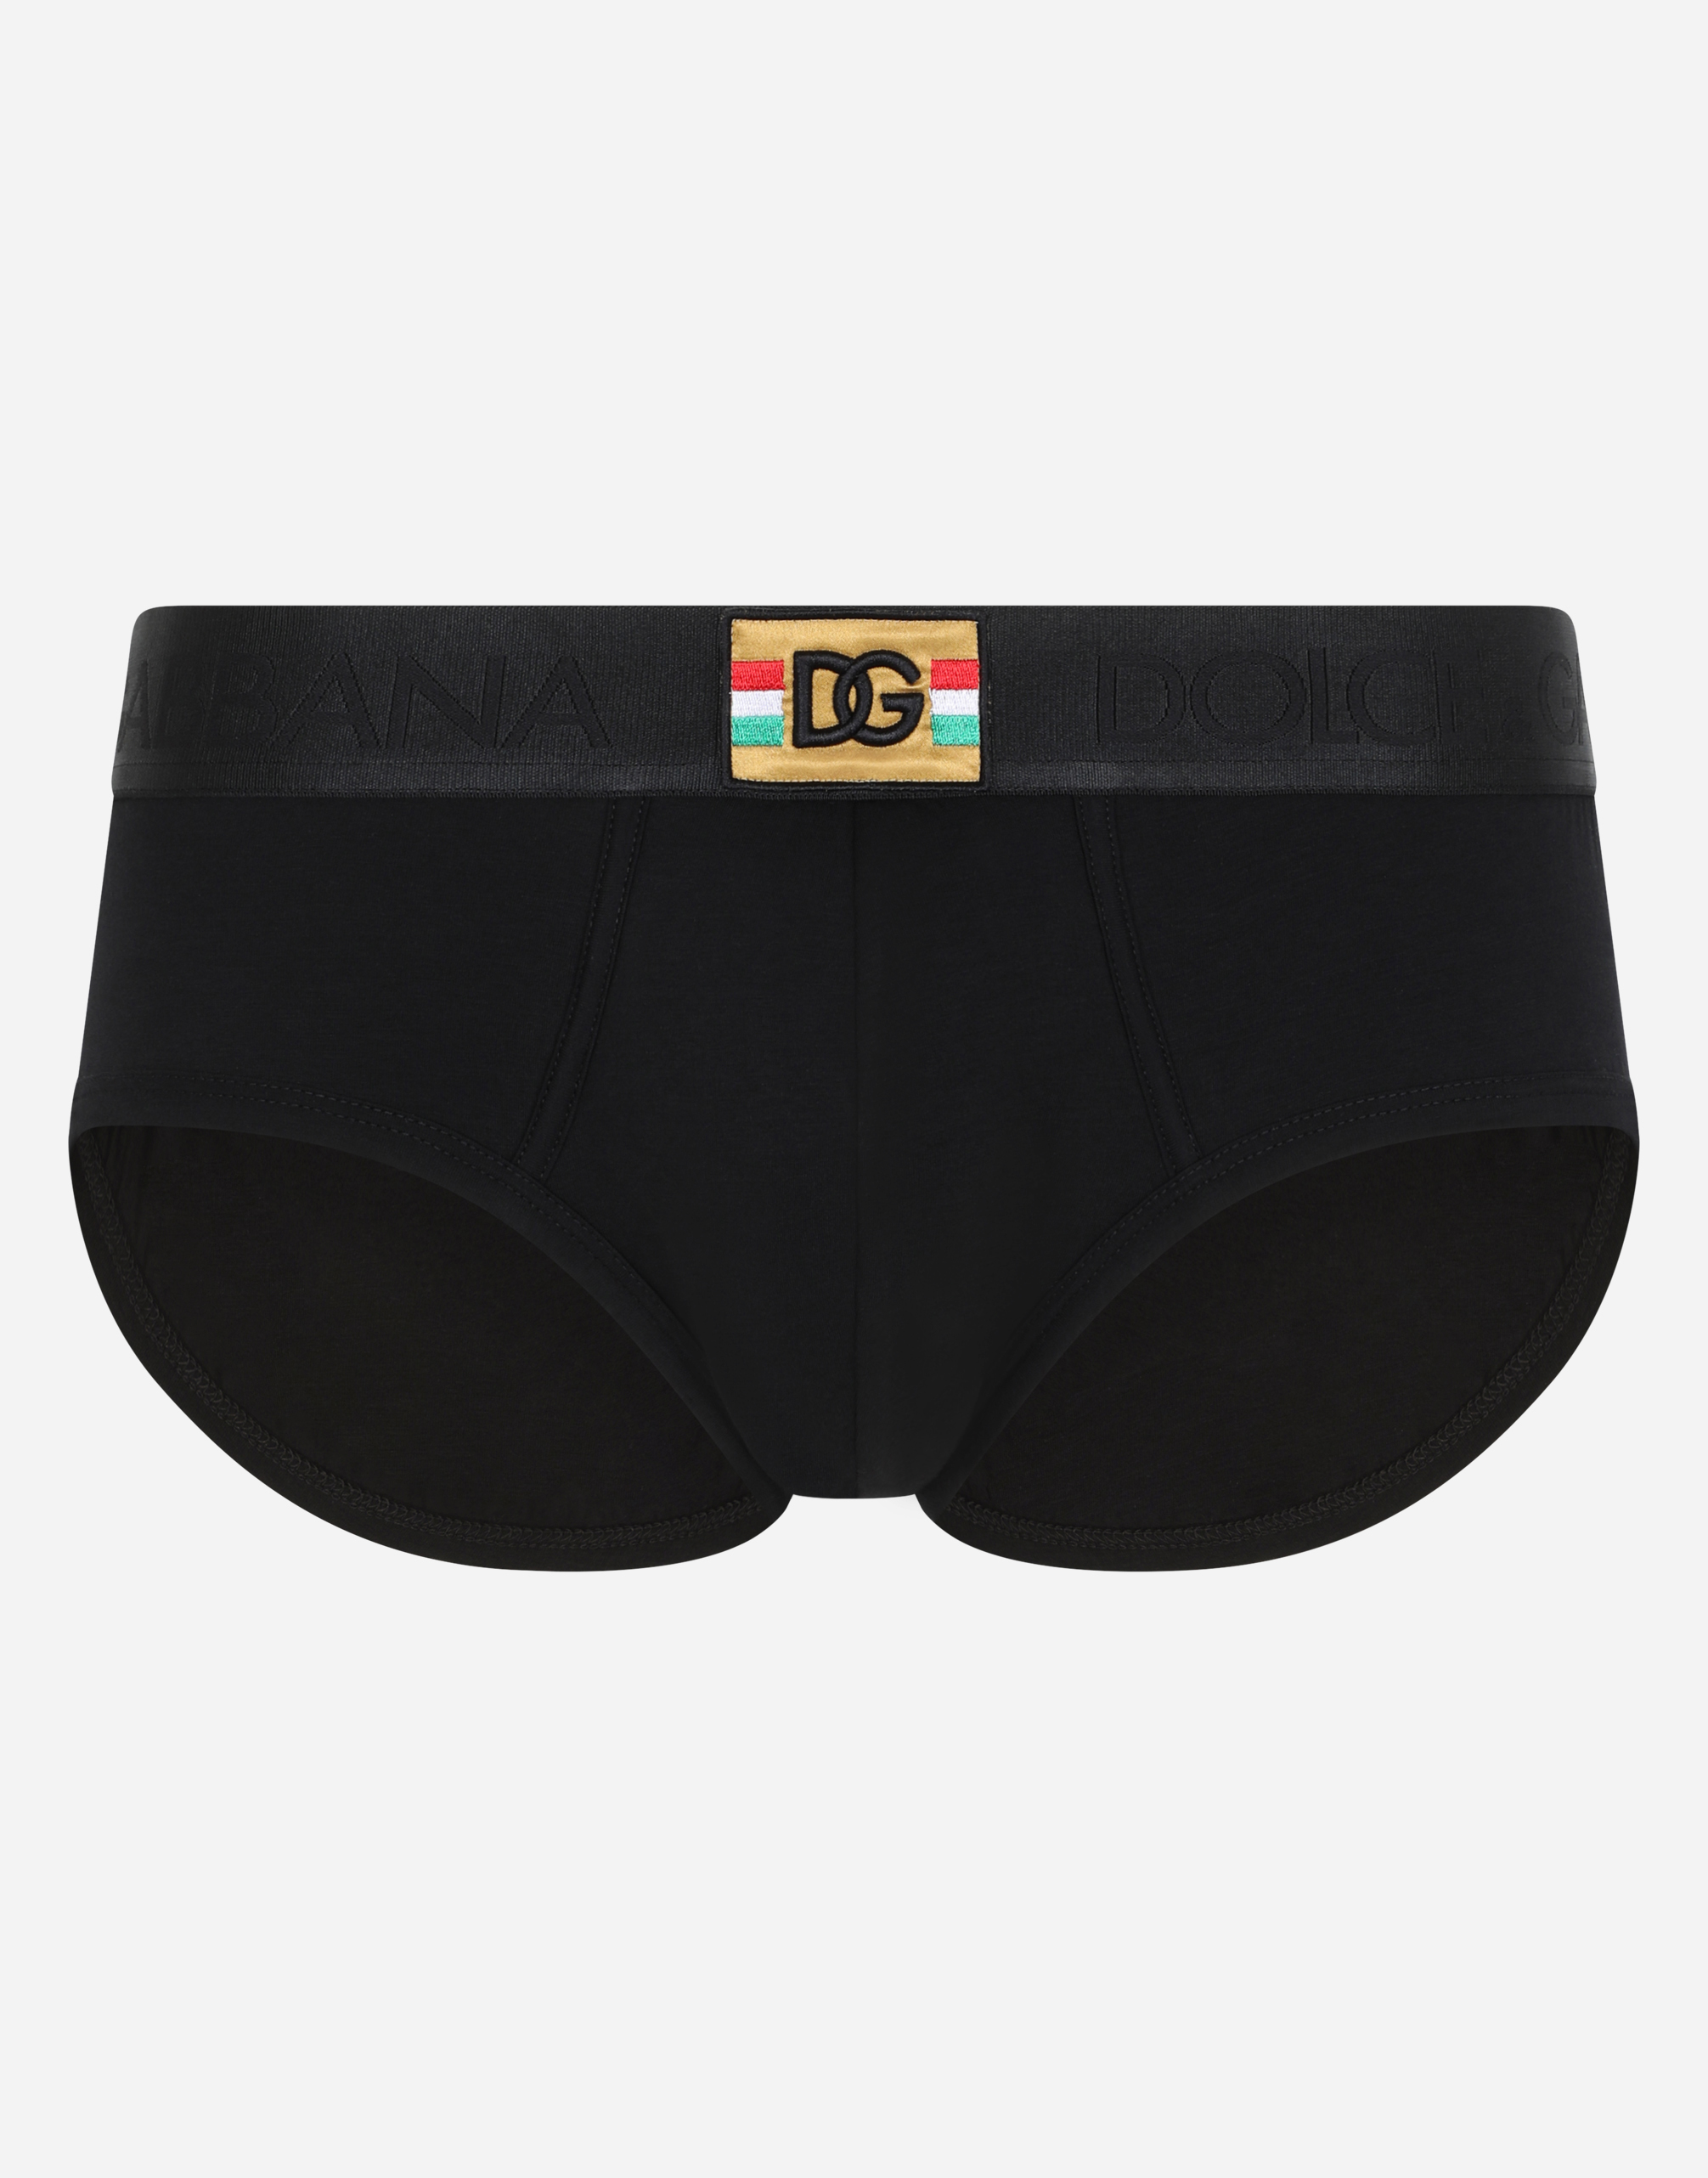 Two-way-stretch jersey Brando briefs with DG patch in Black